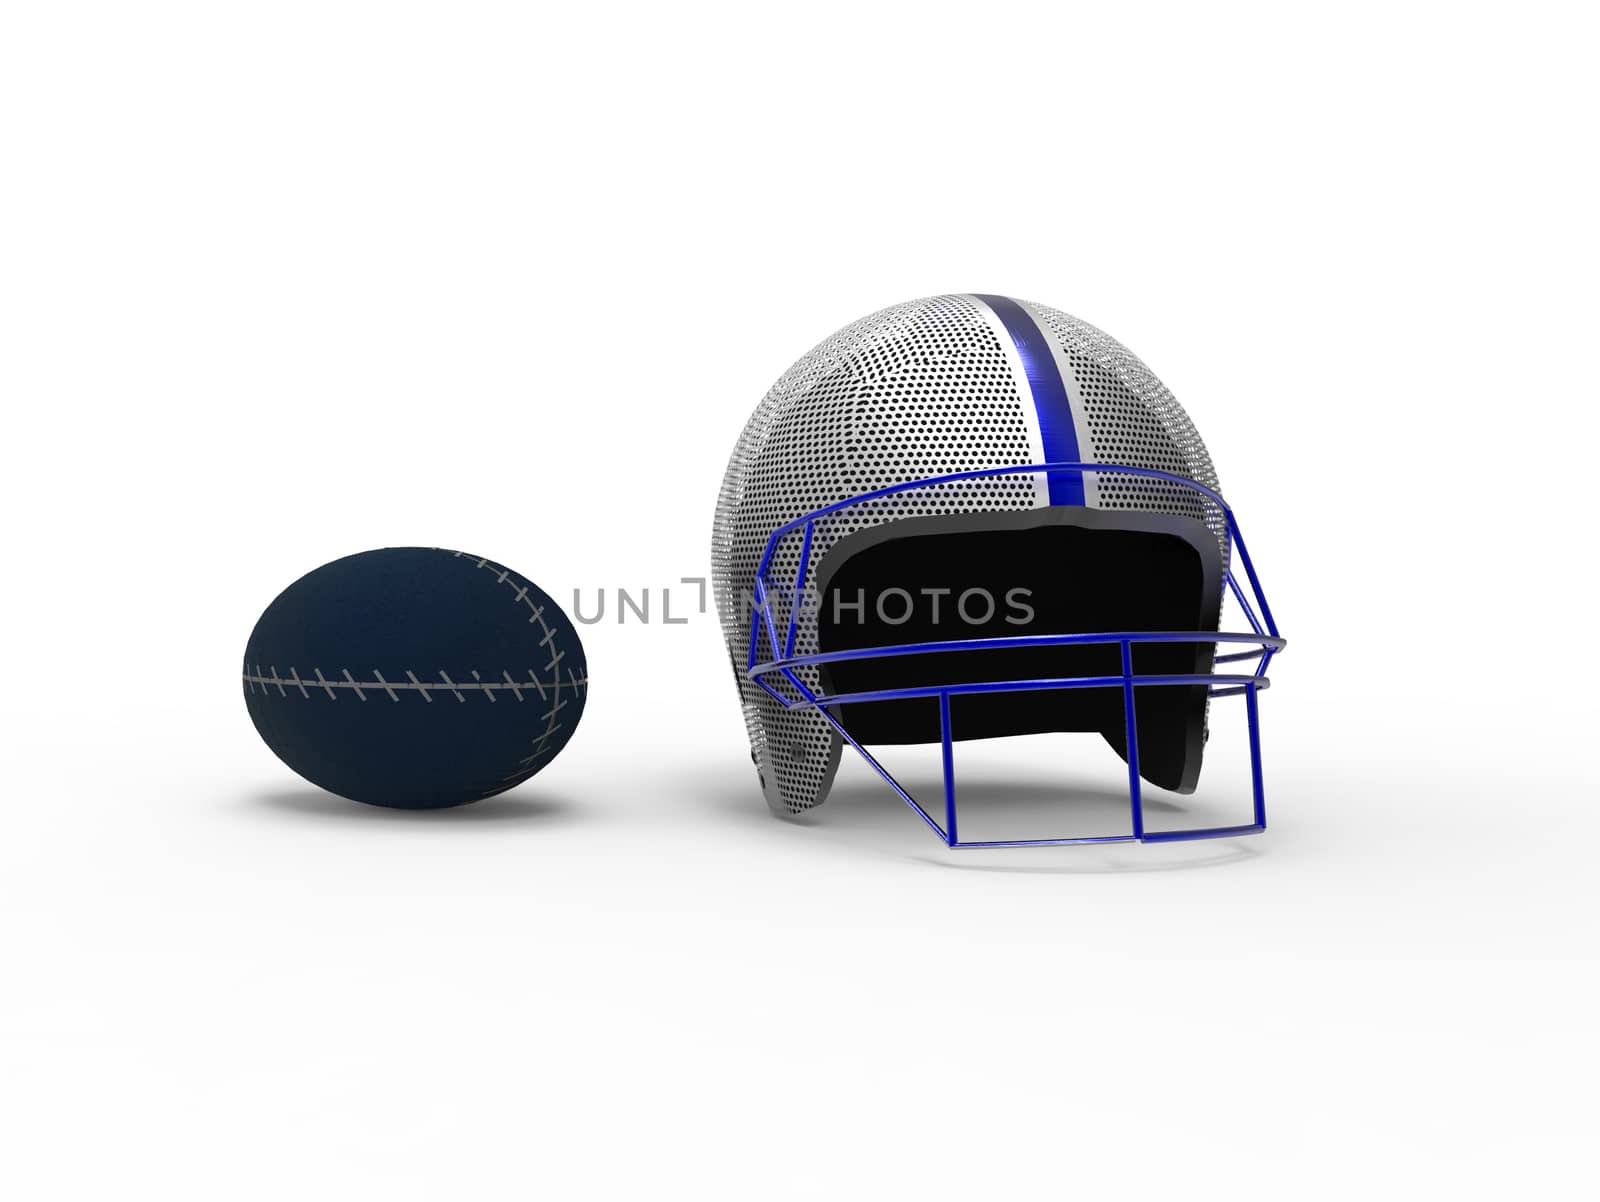 Rugby helmet and ball by apichart